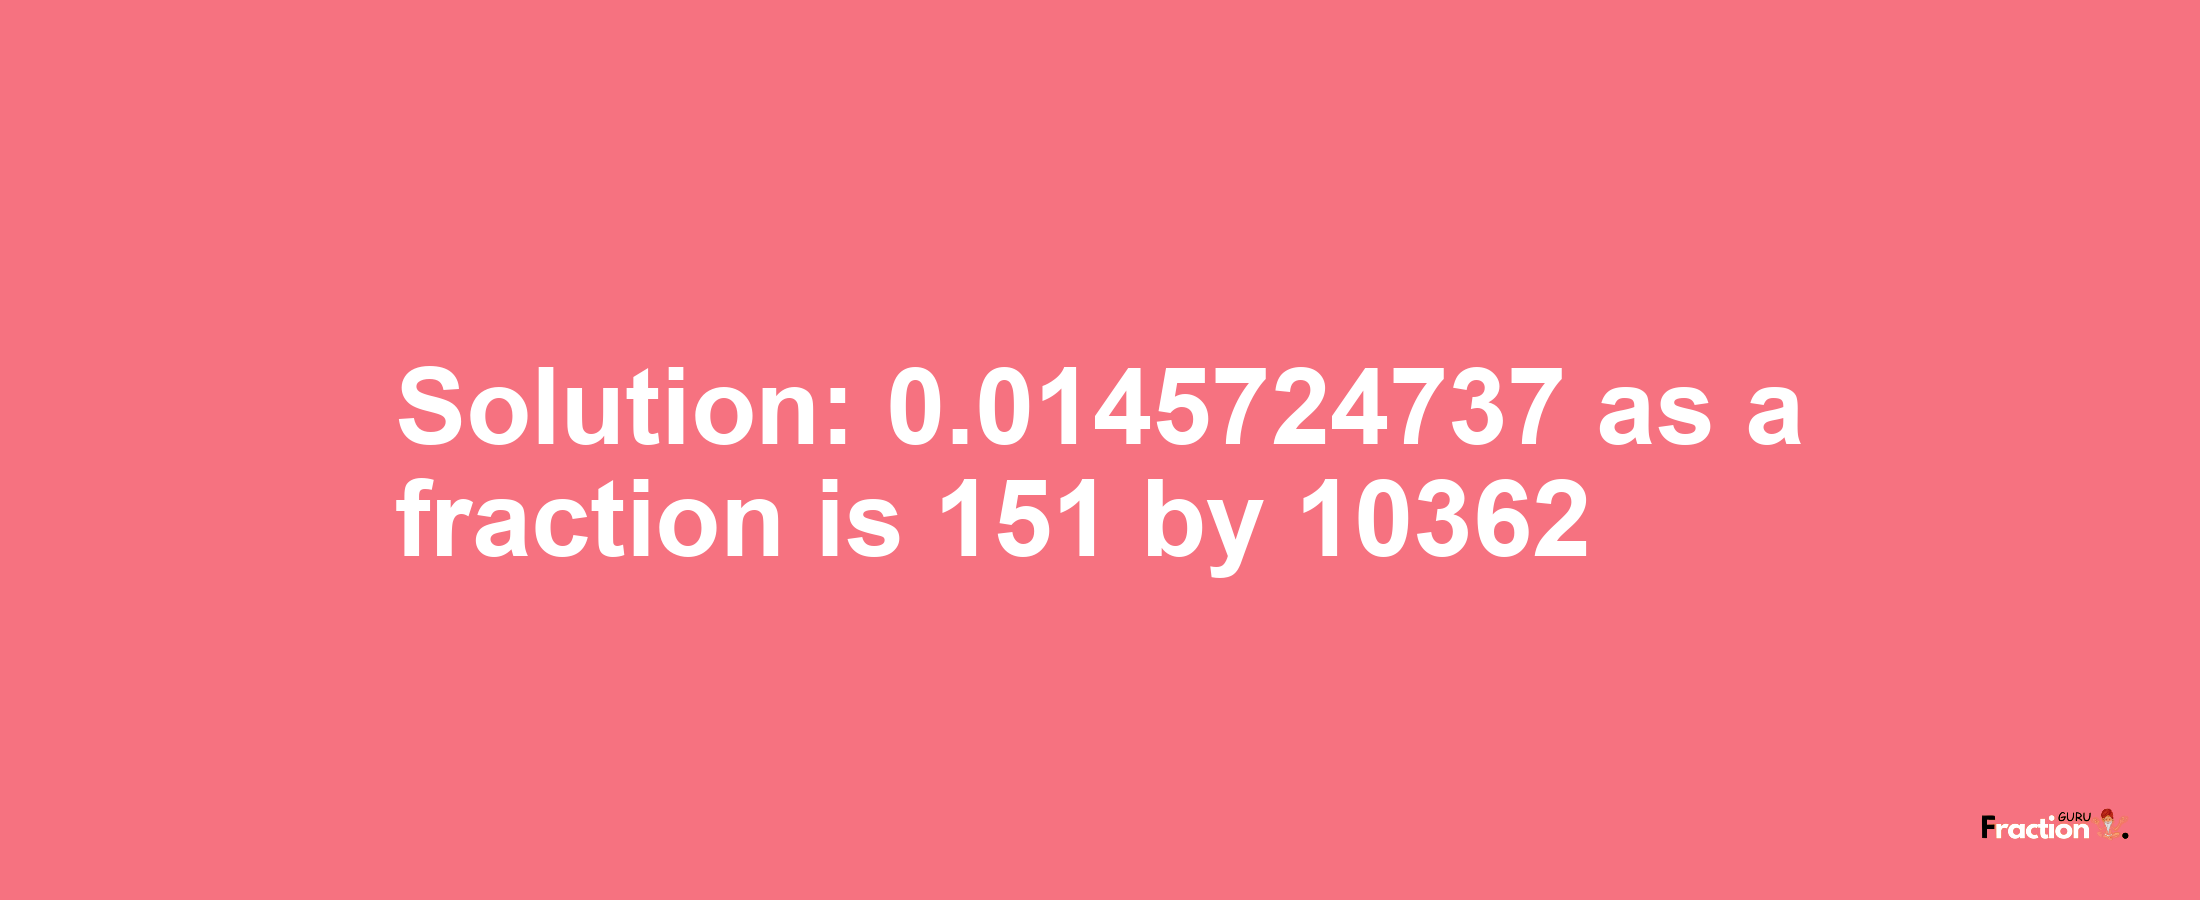 Solution:0.0145724737 as a fraction is 151/10362